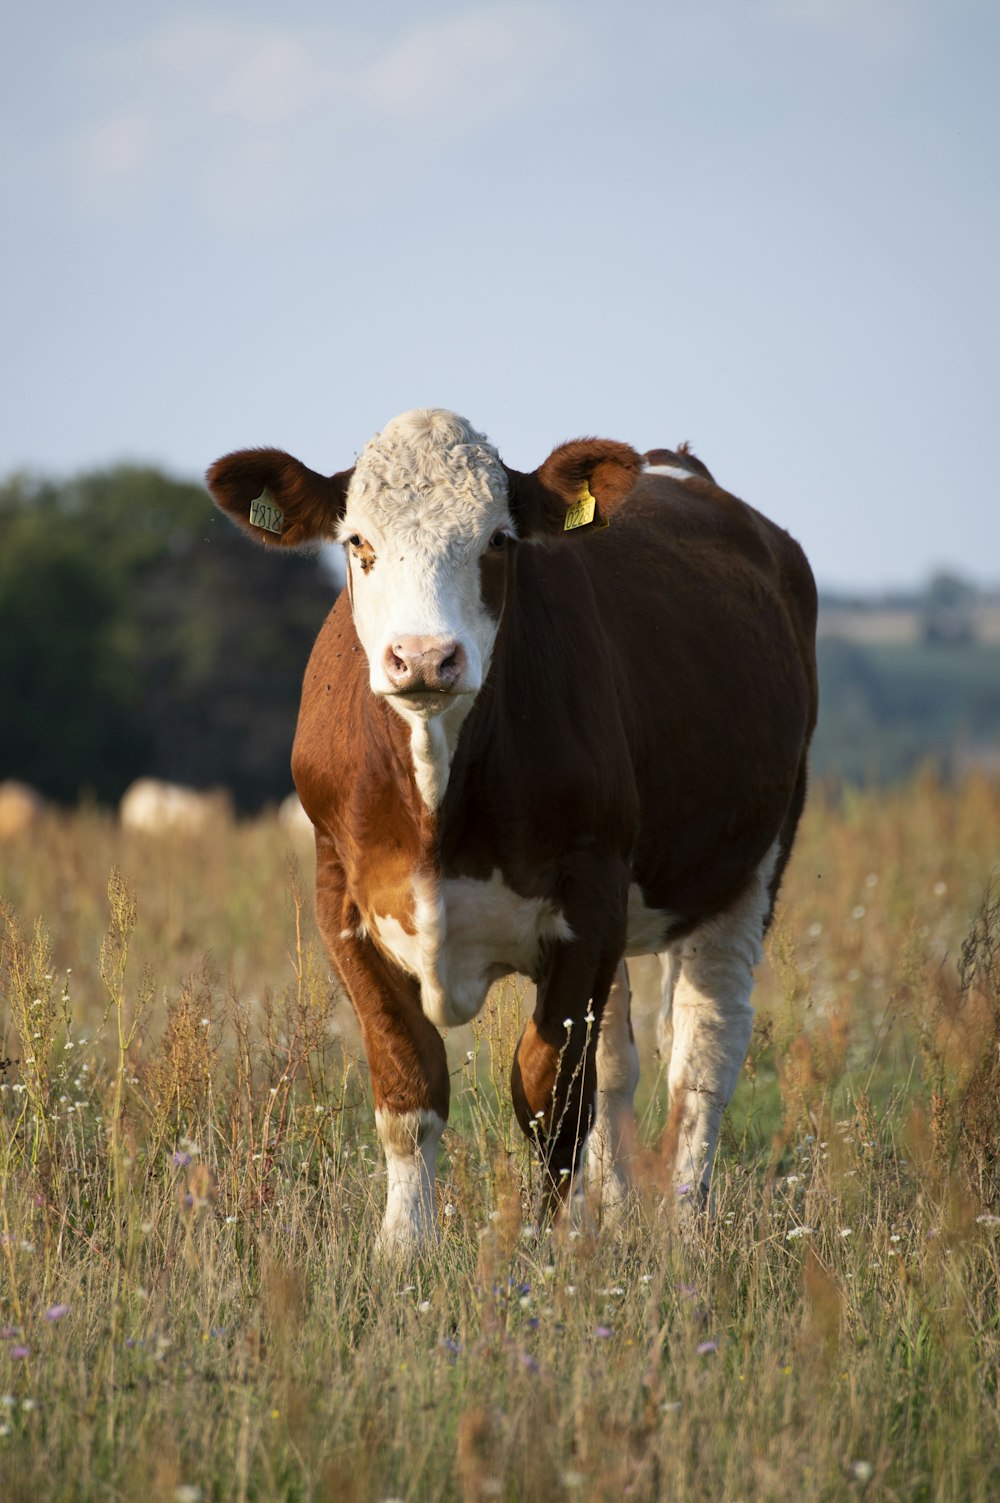 brown and white cow on brown grass field during daytime